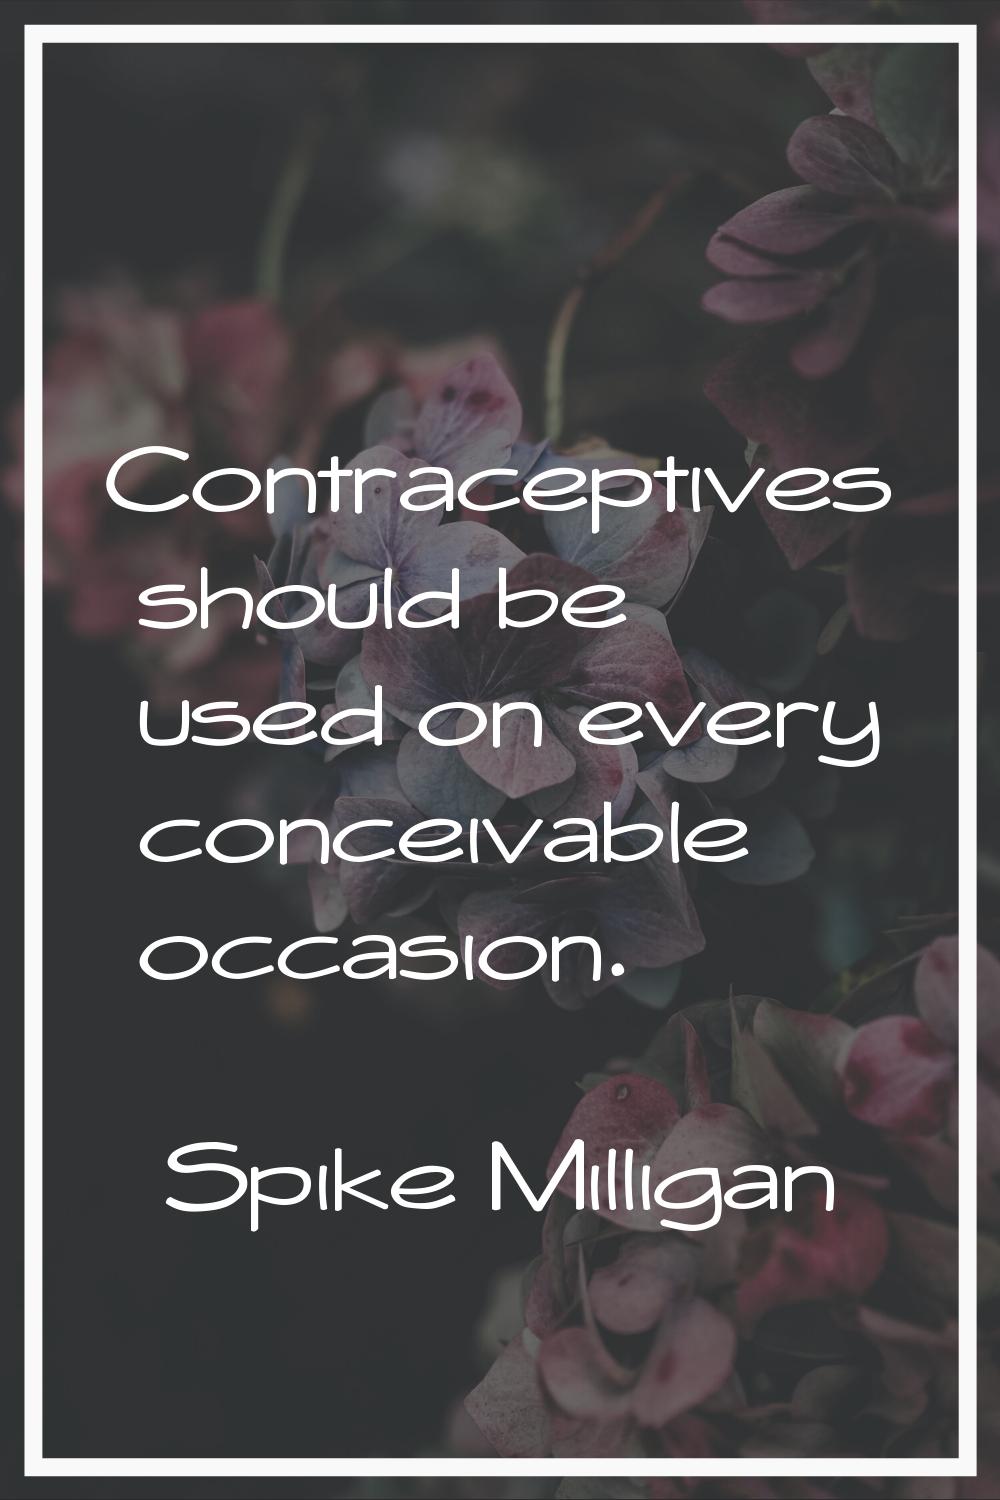 Contraceptives should be used on every conceivable occasion.